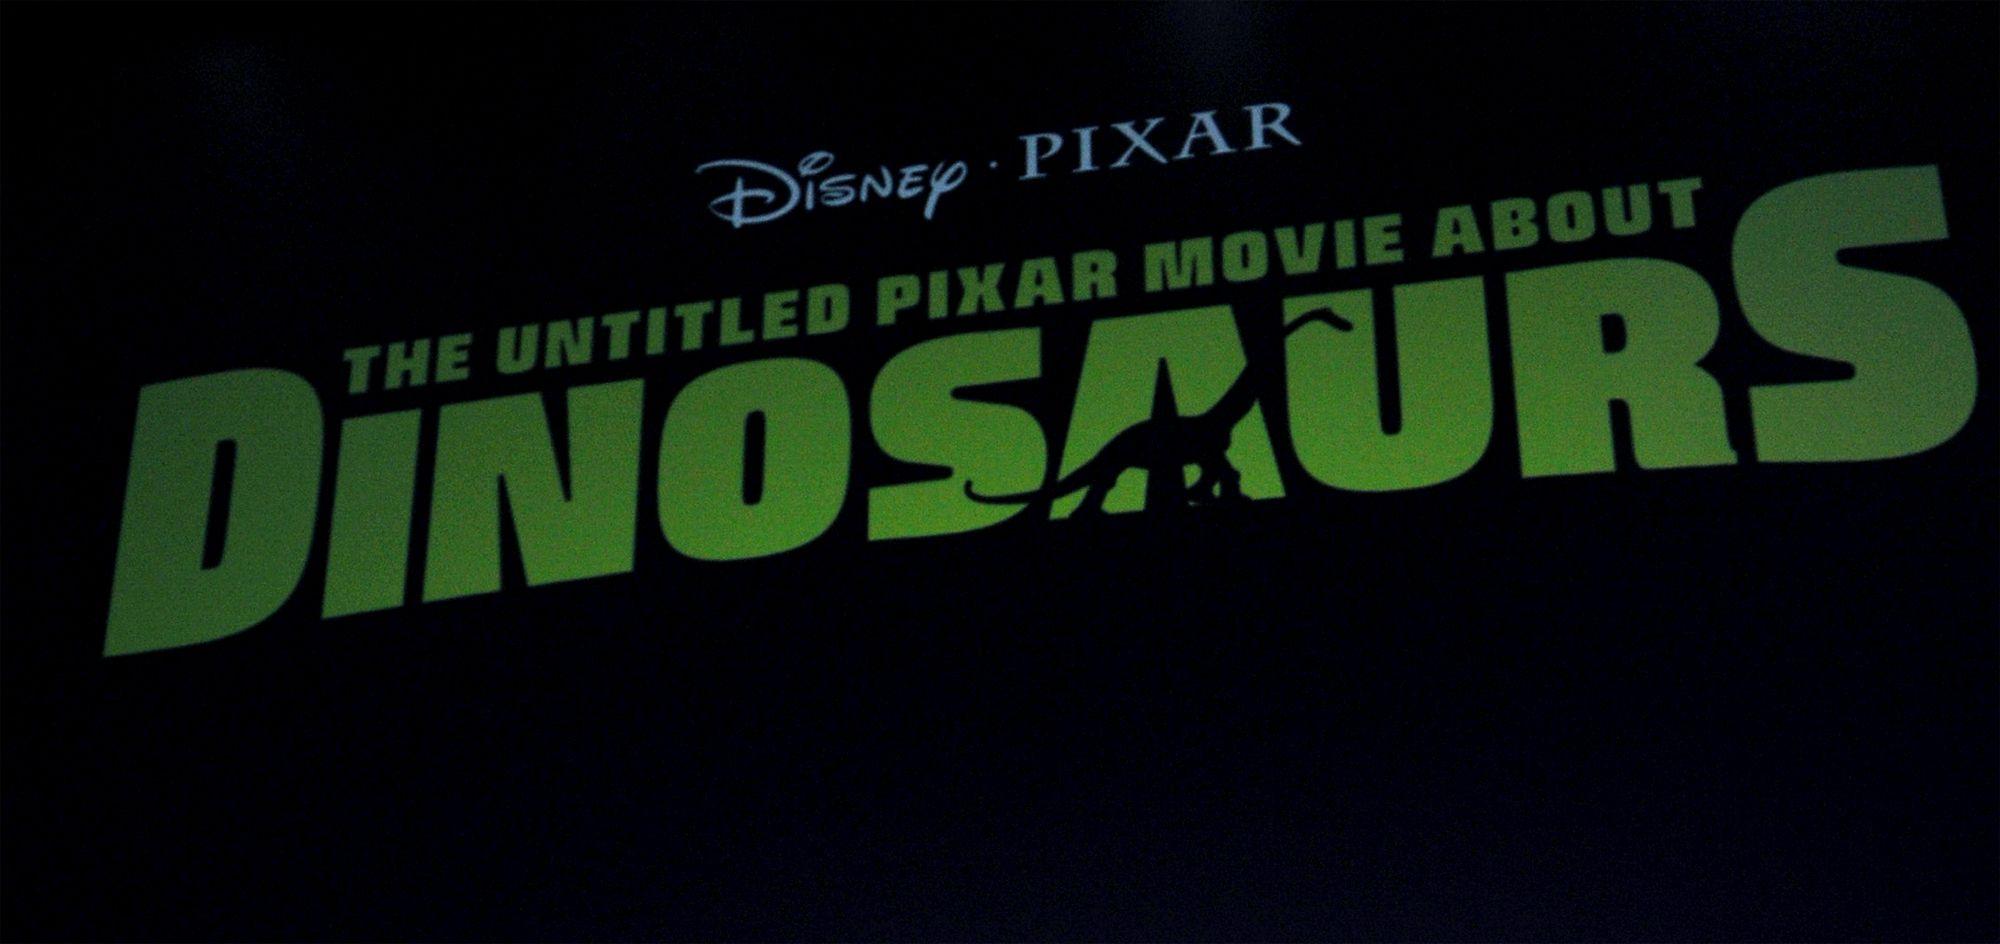 Disney Pixar Movie Logo - LOL: See the Temp Logo For 'The Untitled Pixar Movie About Dinosaurs ...